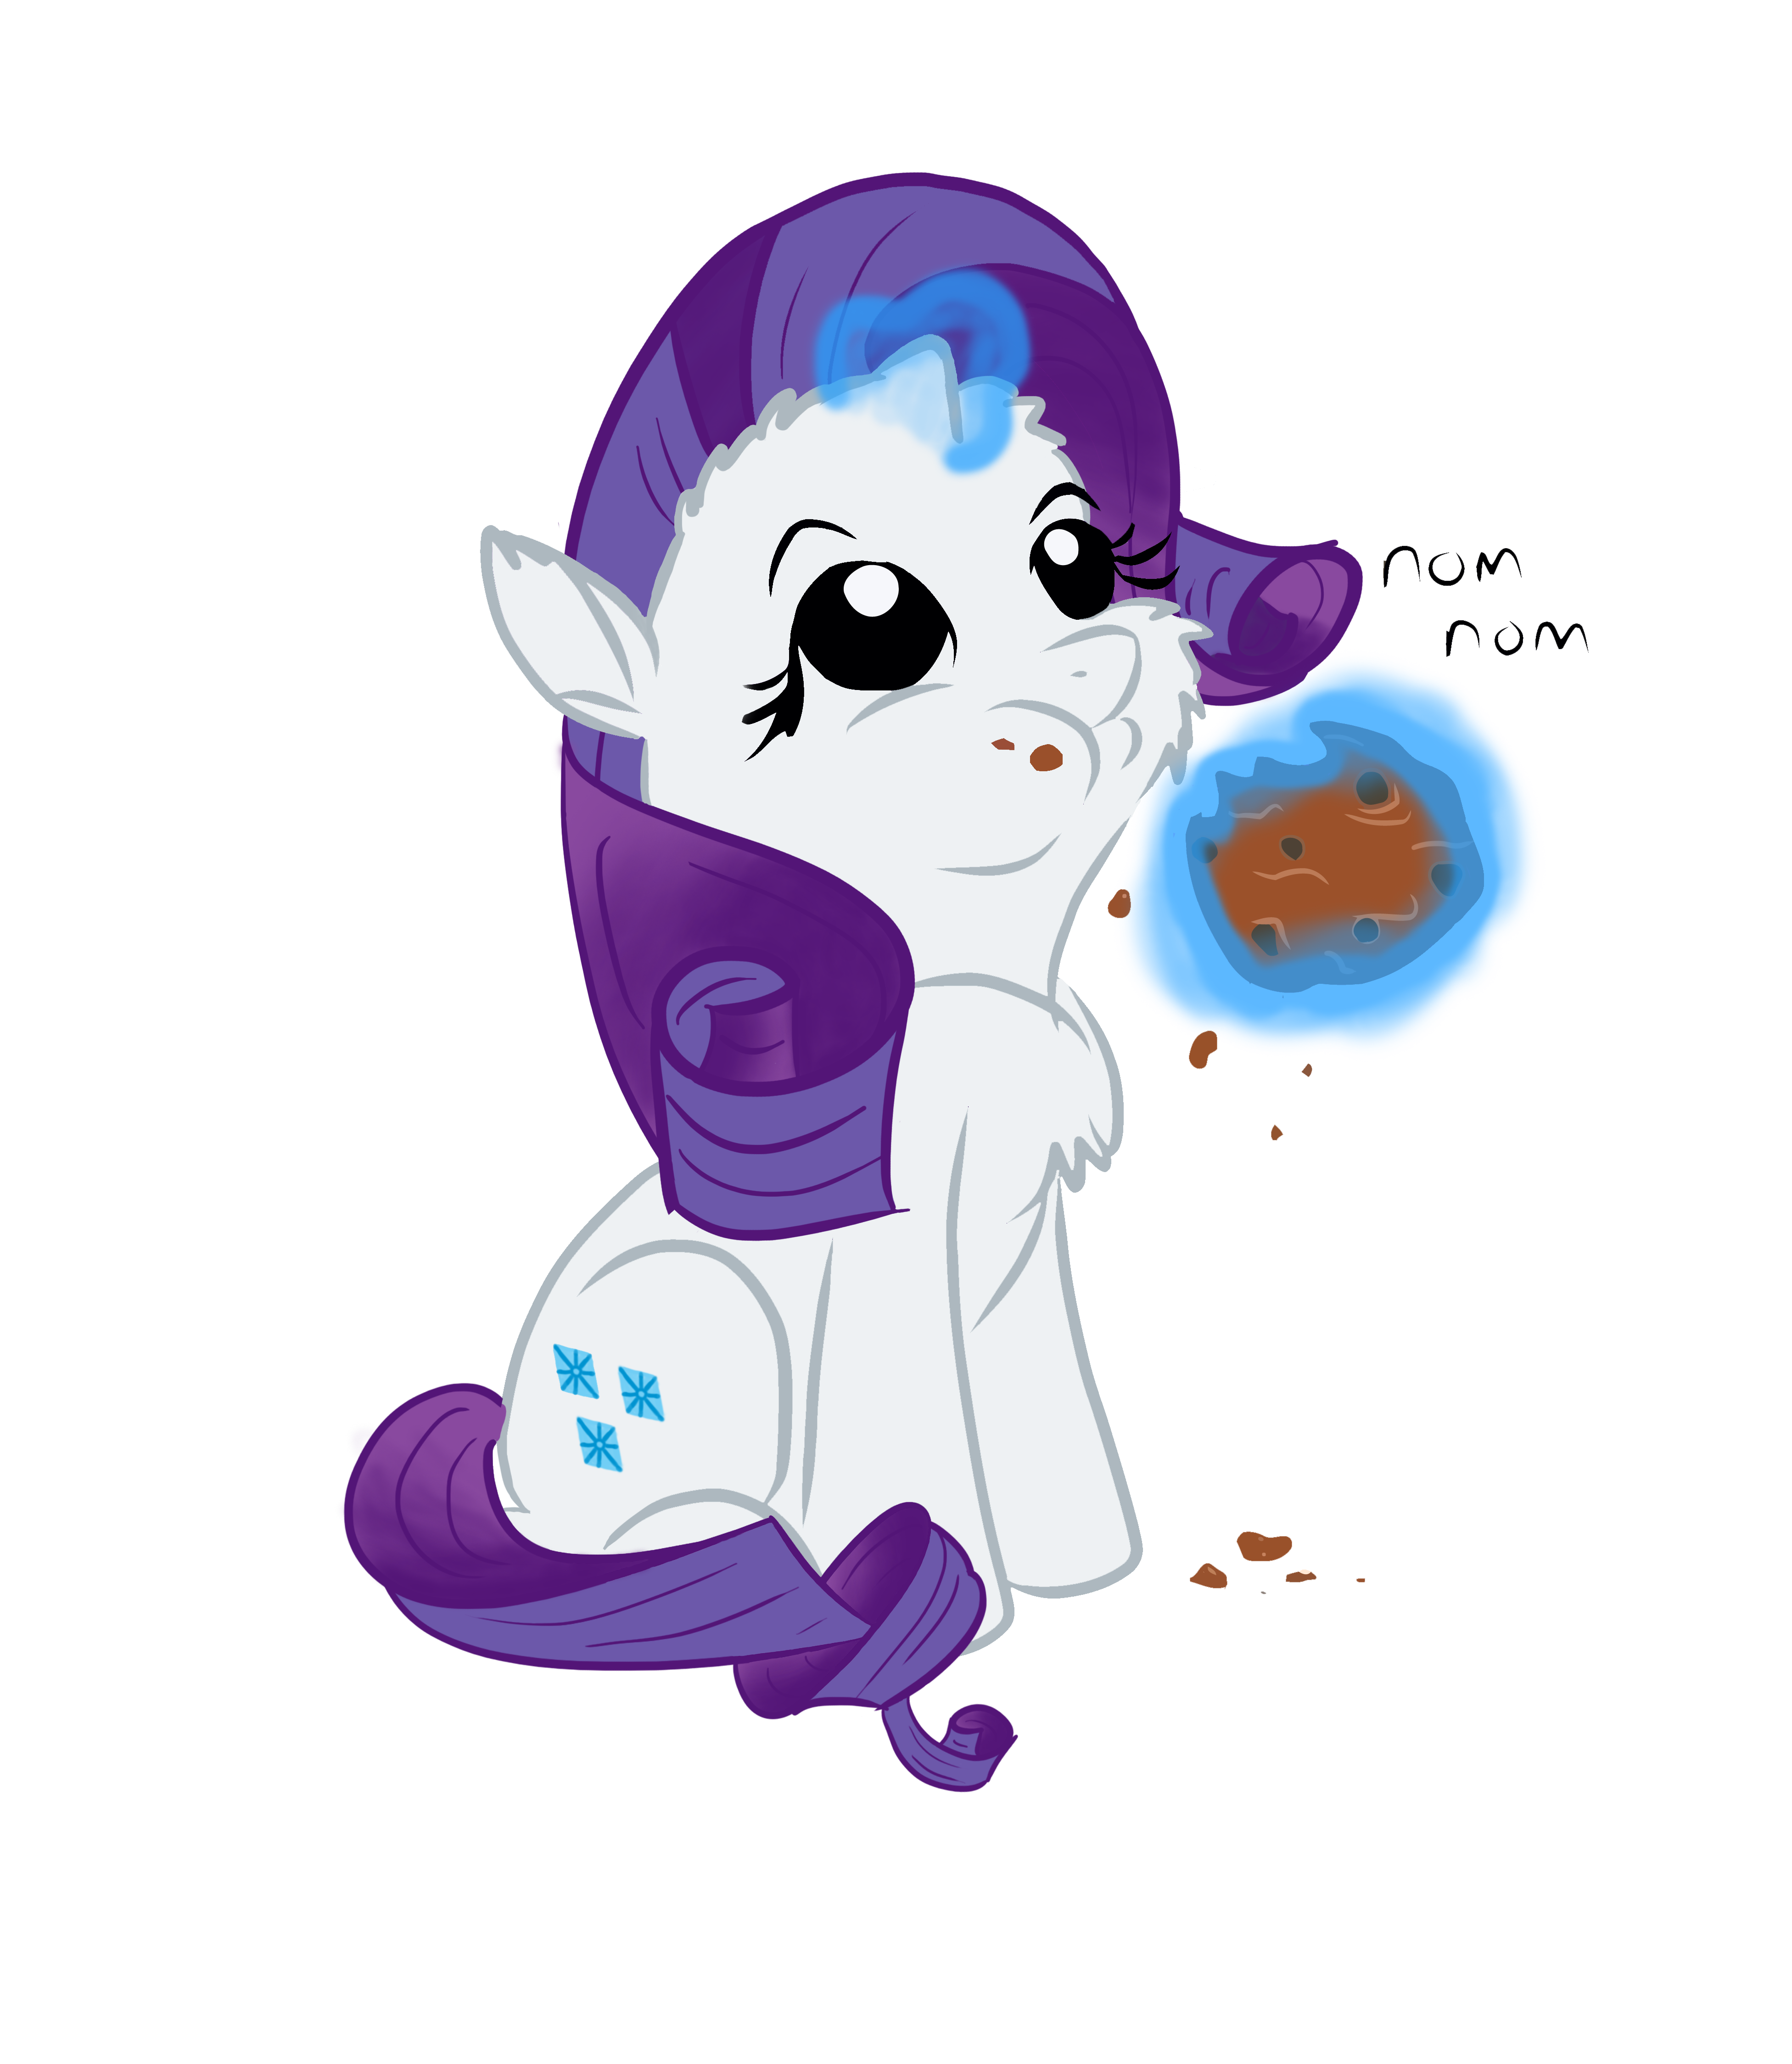 mylilrarity_cookie_nom_by_schnabsix-d4zx